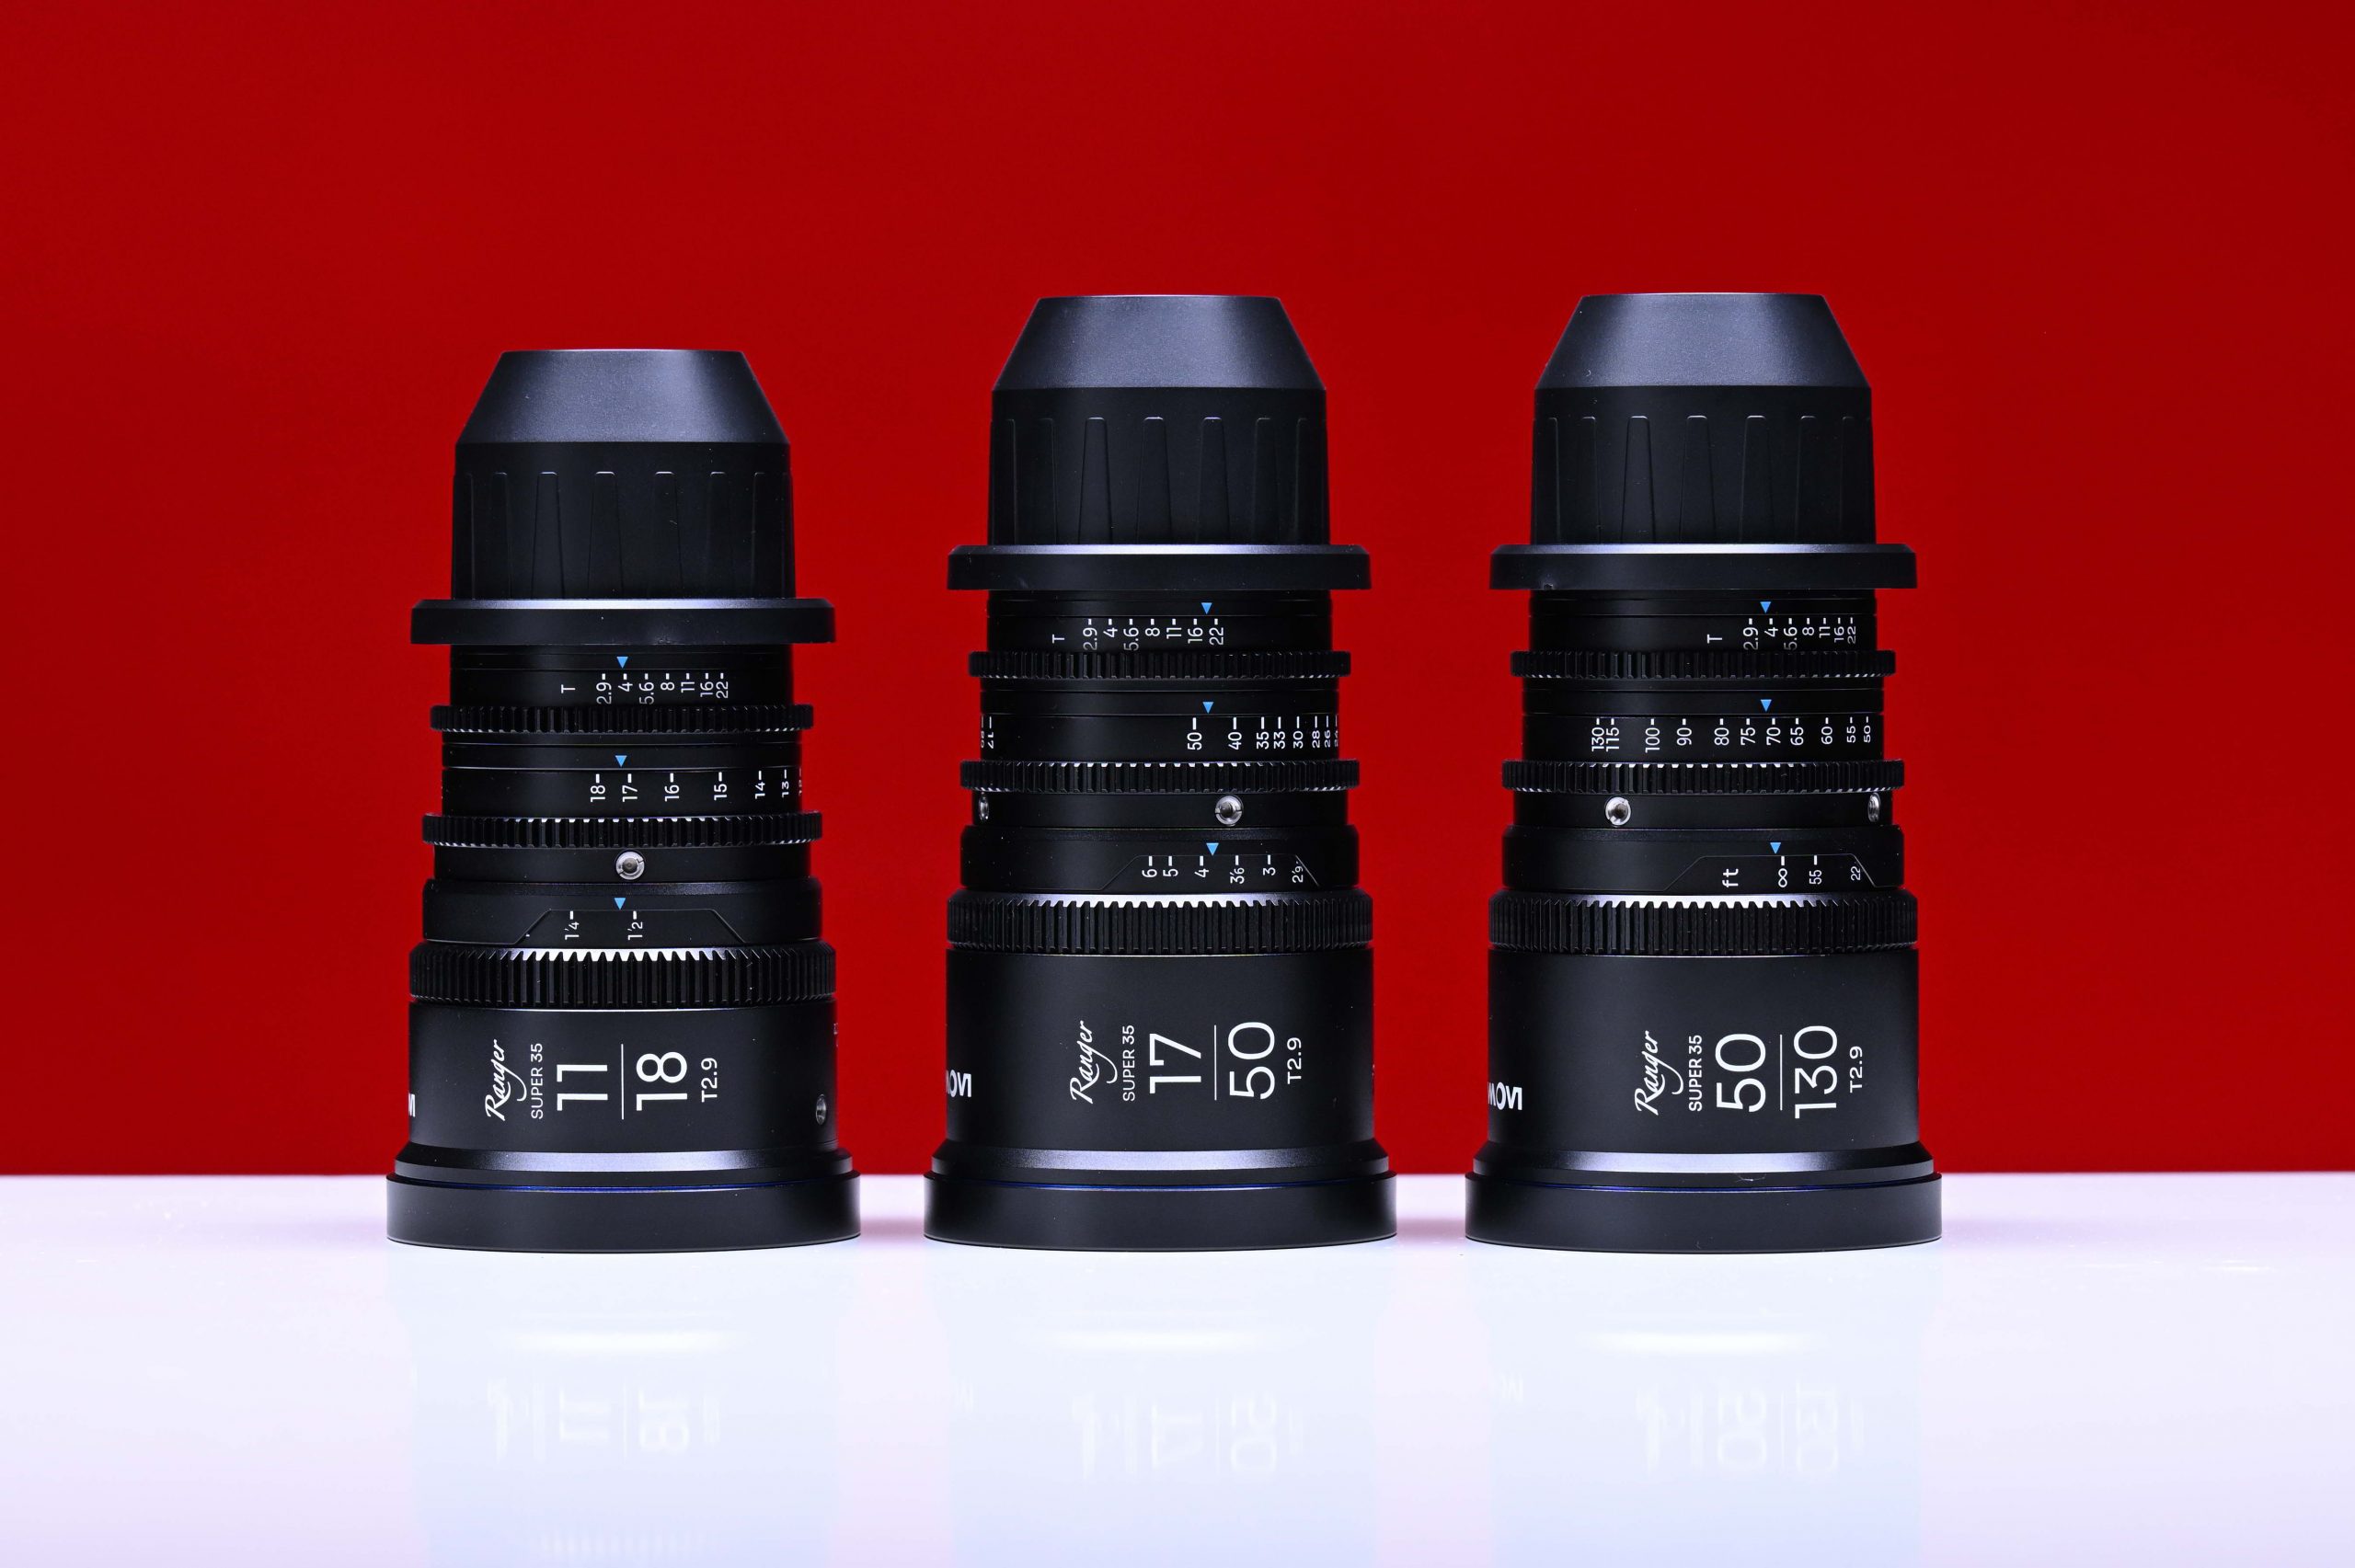 Exploring the Game-Changing Potential of Laowa's Ranger S35 Zoom Lenses